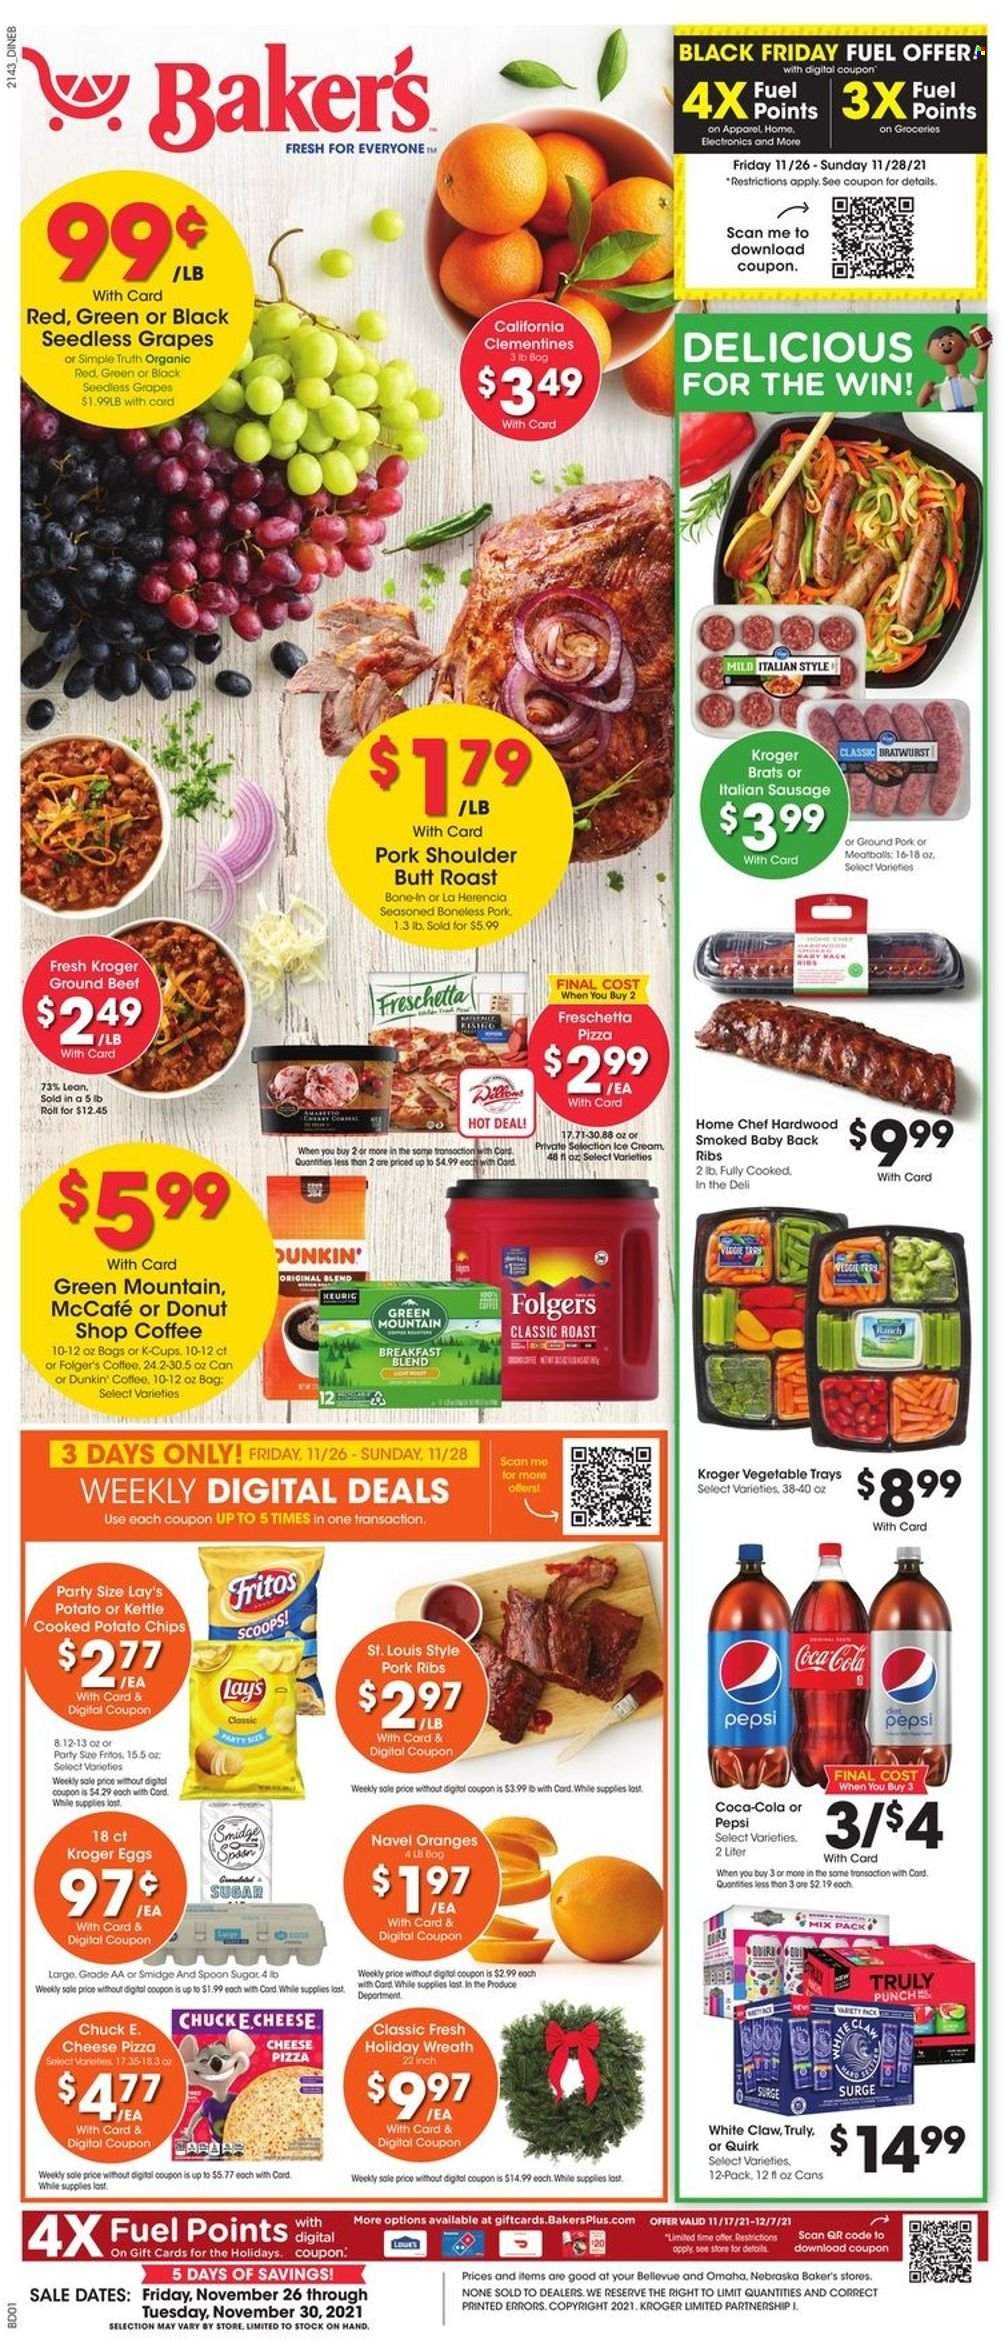 thumbnail - Baker's Flyer - 11/26/2021 - 11/30/2021 - Sales products - seedless grapes, donut, grapes, oranges, pizza, bratwurst, sausage, italian sausage, eggs, Fritos, potato chips, chips, Lay’s, sugar, Coca-Cola, Pepsi, coffee, Folgers, coffee capsules, McCafe, K-Cups, breakfast blend, Green Mountain, White Claw, TRULY, beef meat, ground beef, ground pork, pork meat, pork ribs, pork shoulder, pork back ribs, spoon, wreath, clementines, navel oranges. Page 1.